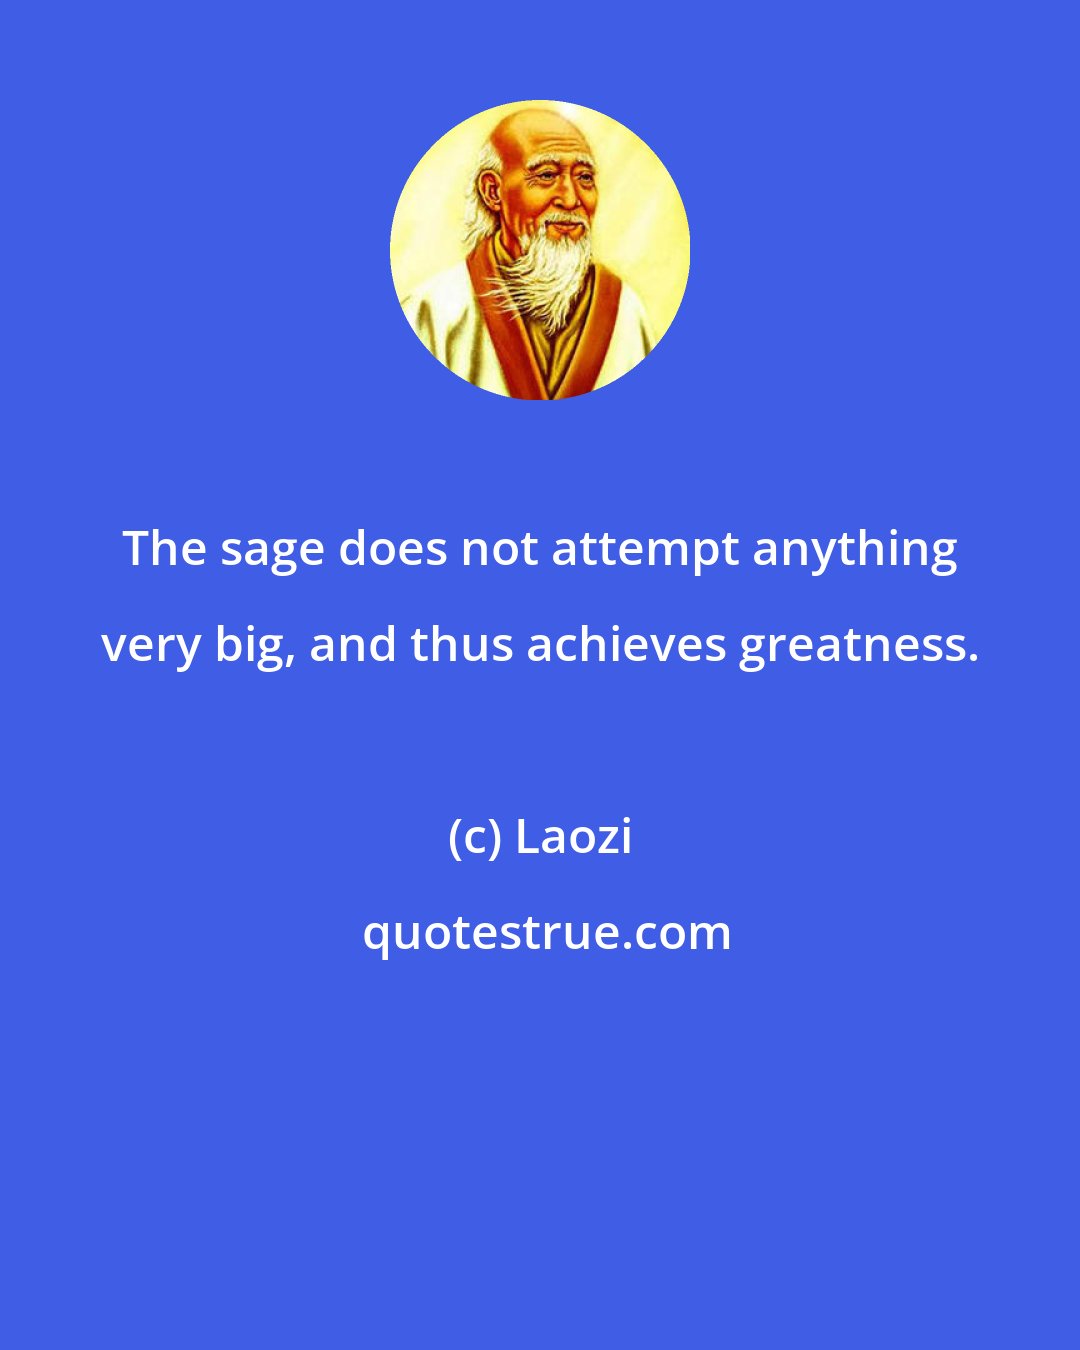 Laozi: The sage does not attempt anything very big, and thus achieves greatness.